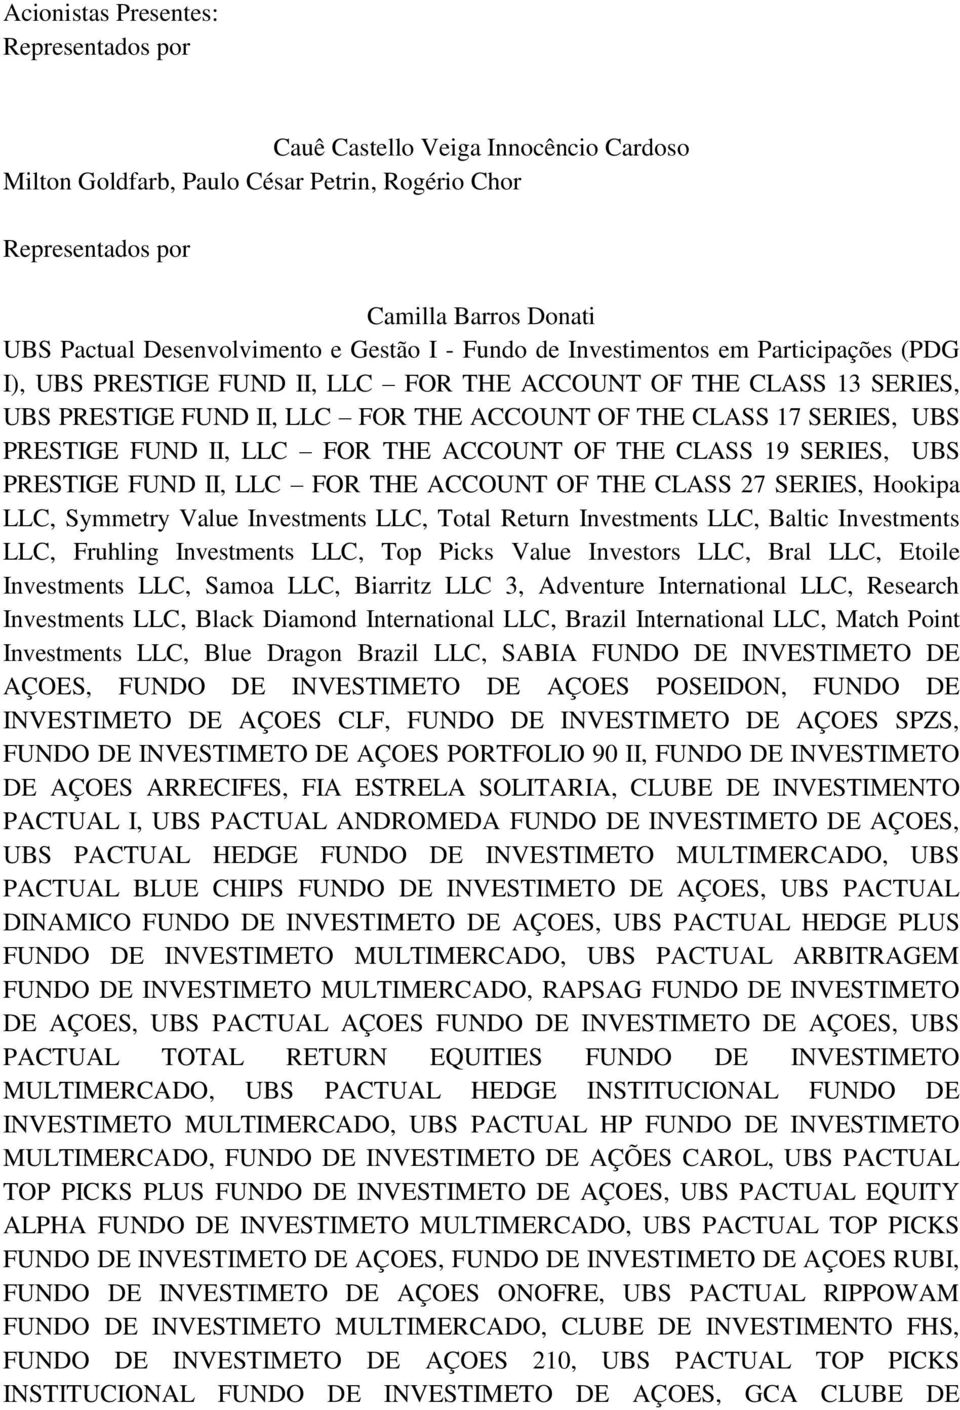 PRESTIGE FUND II, LLC FOR THE ACCOUNT OF THE CLASS 19 SERIES, UBS PRESTIGE FUND II, LLC FOR THE ACCOUNT OF THE CLASS 27 SERIES, Hookipa LLC, Symmetry Value Investments LLC, Total Return Investments